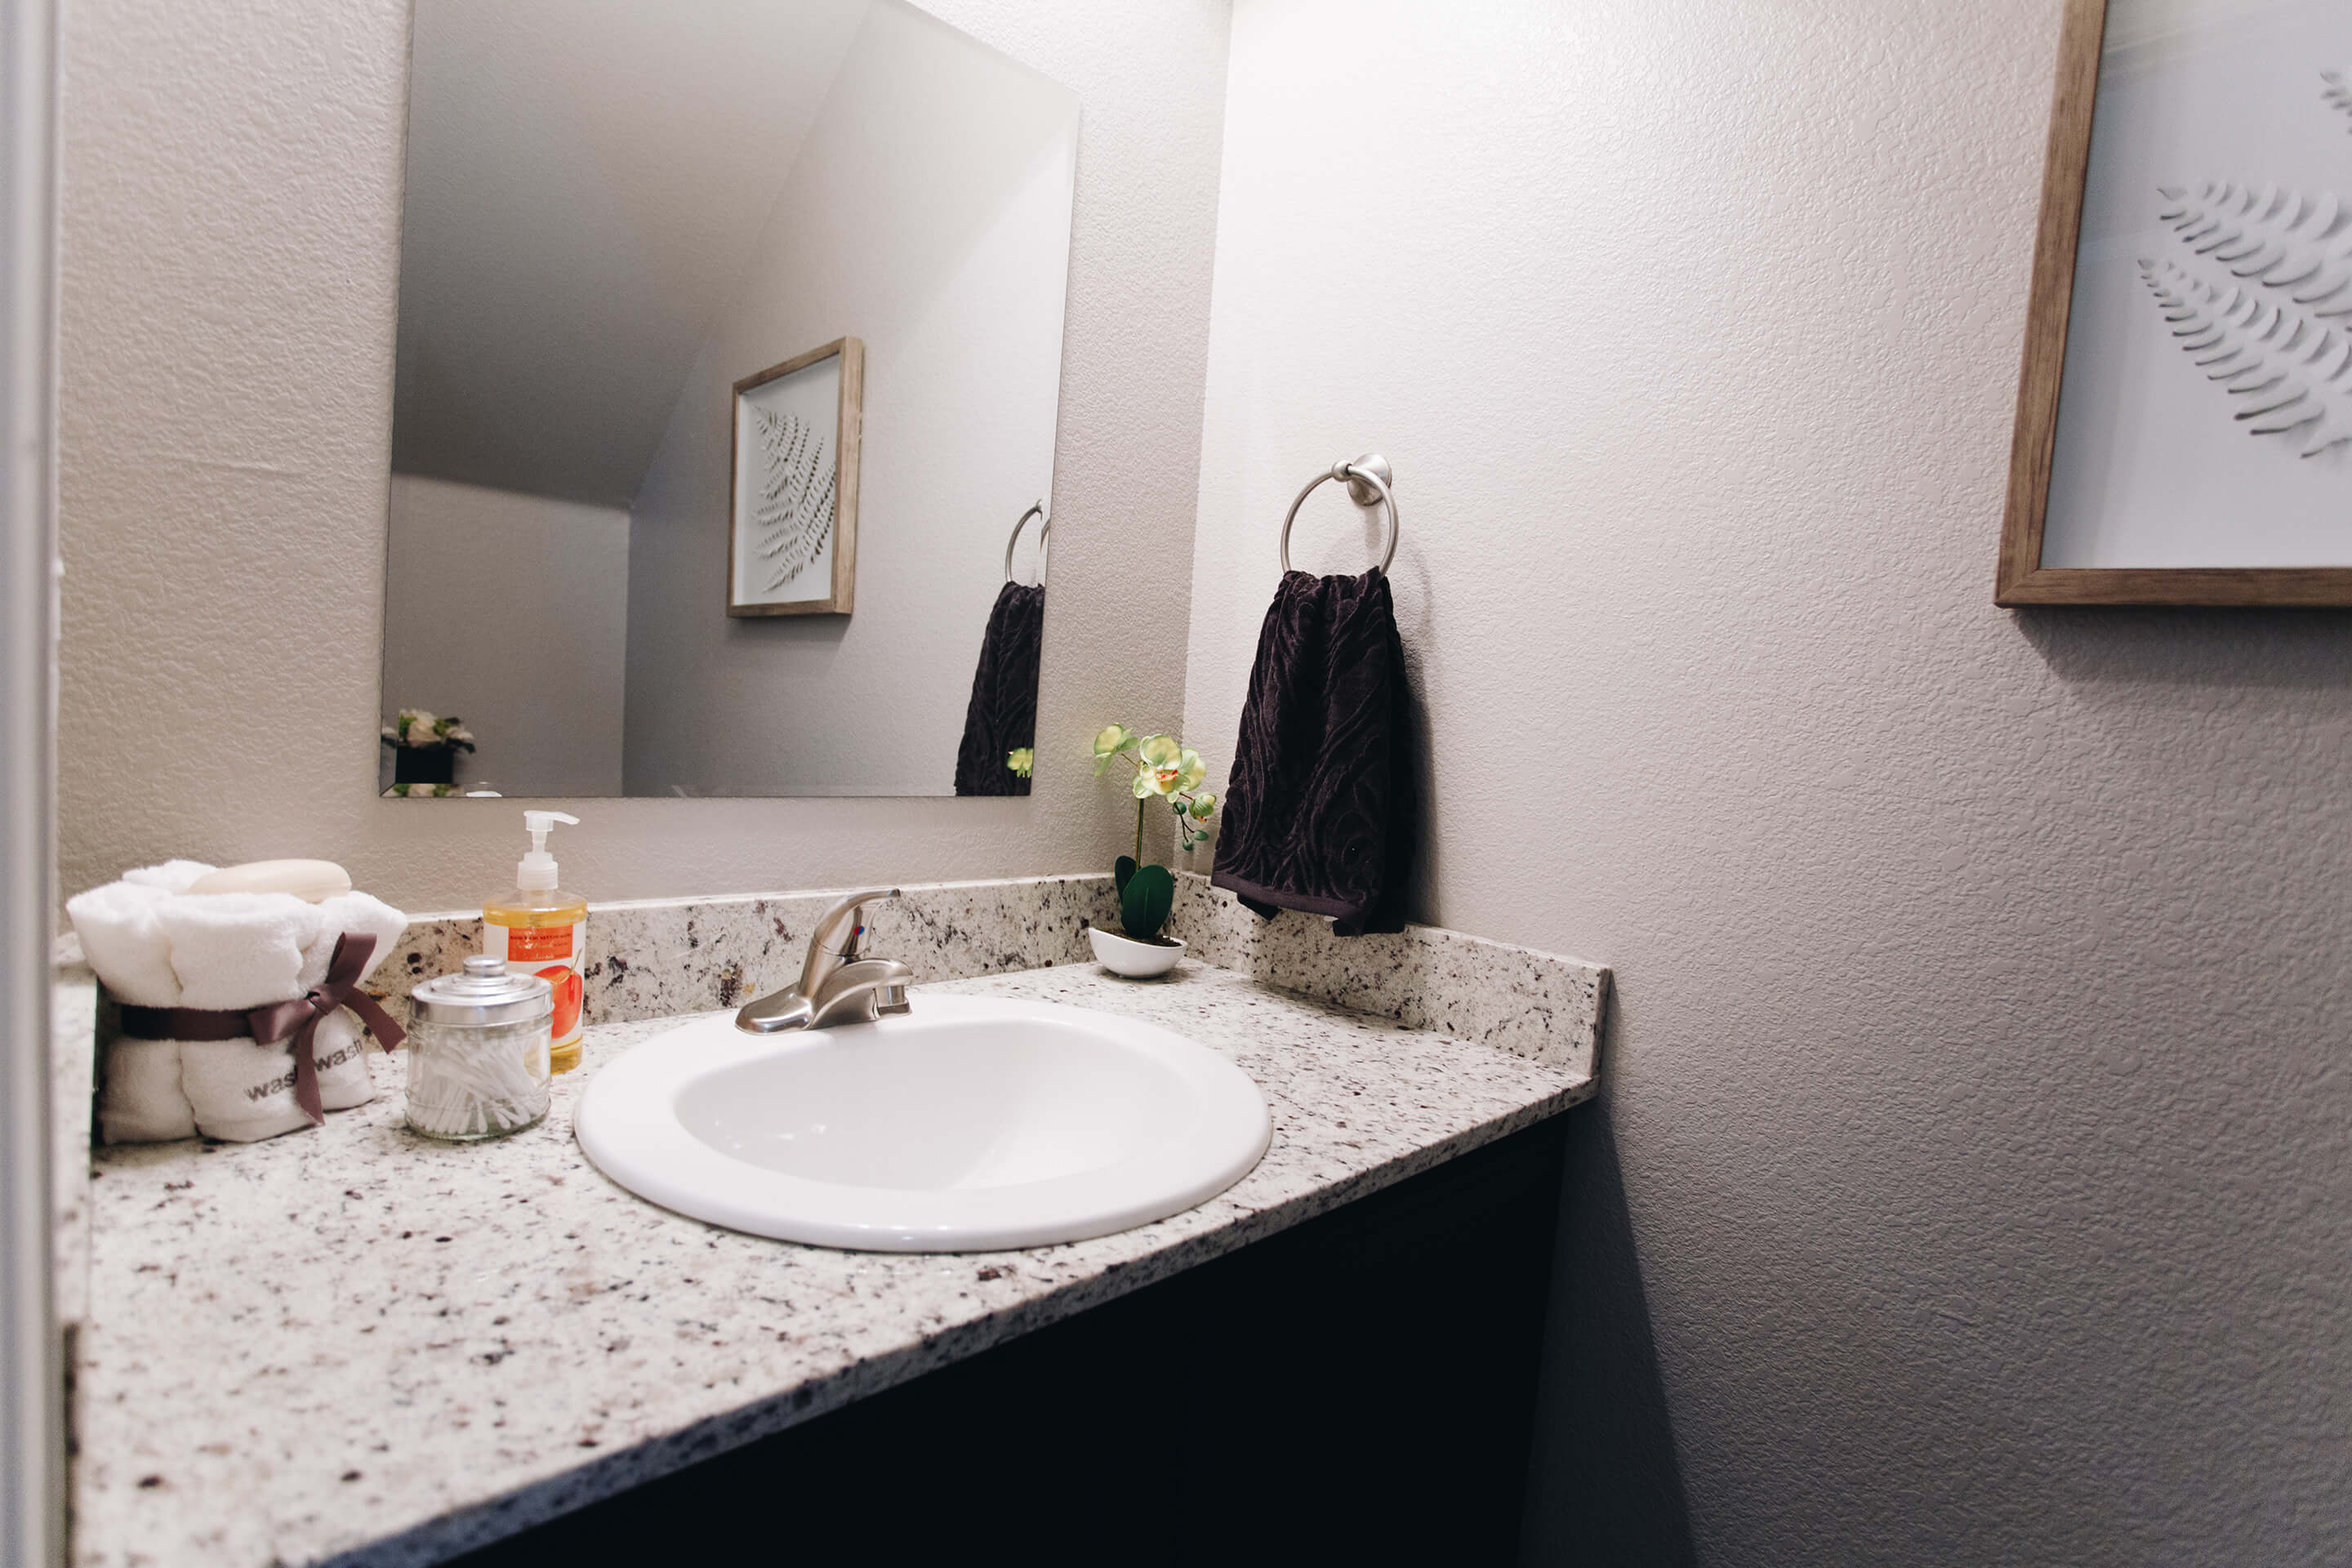 a picture of the bath room in the durango townhome